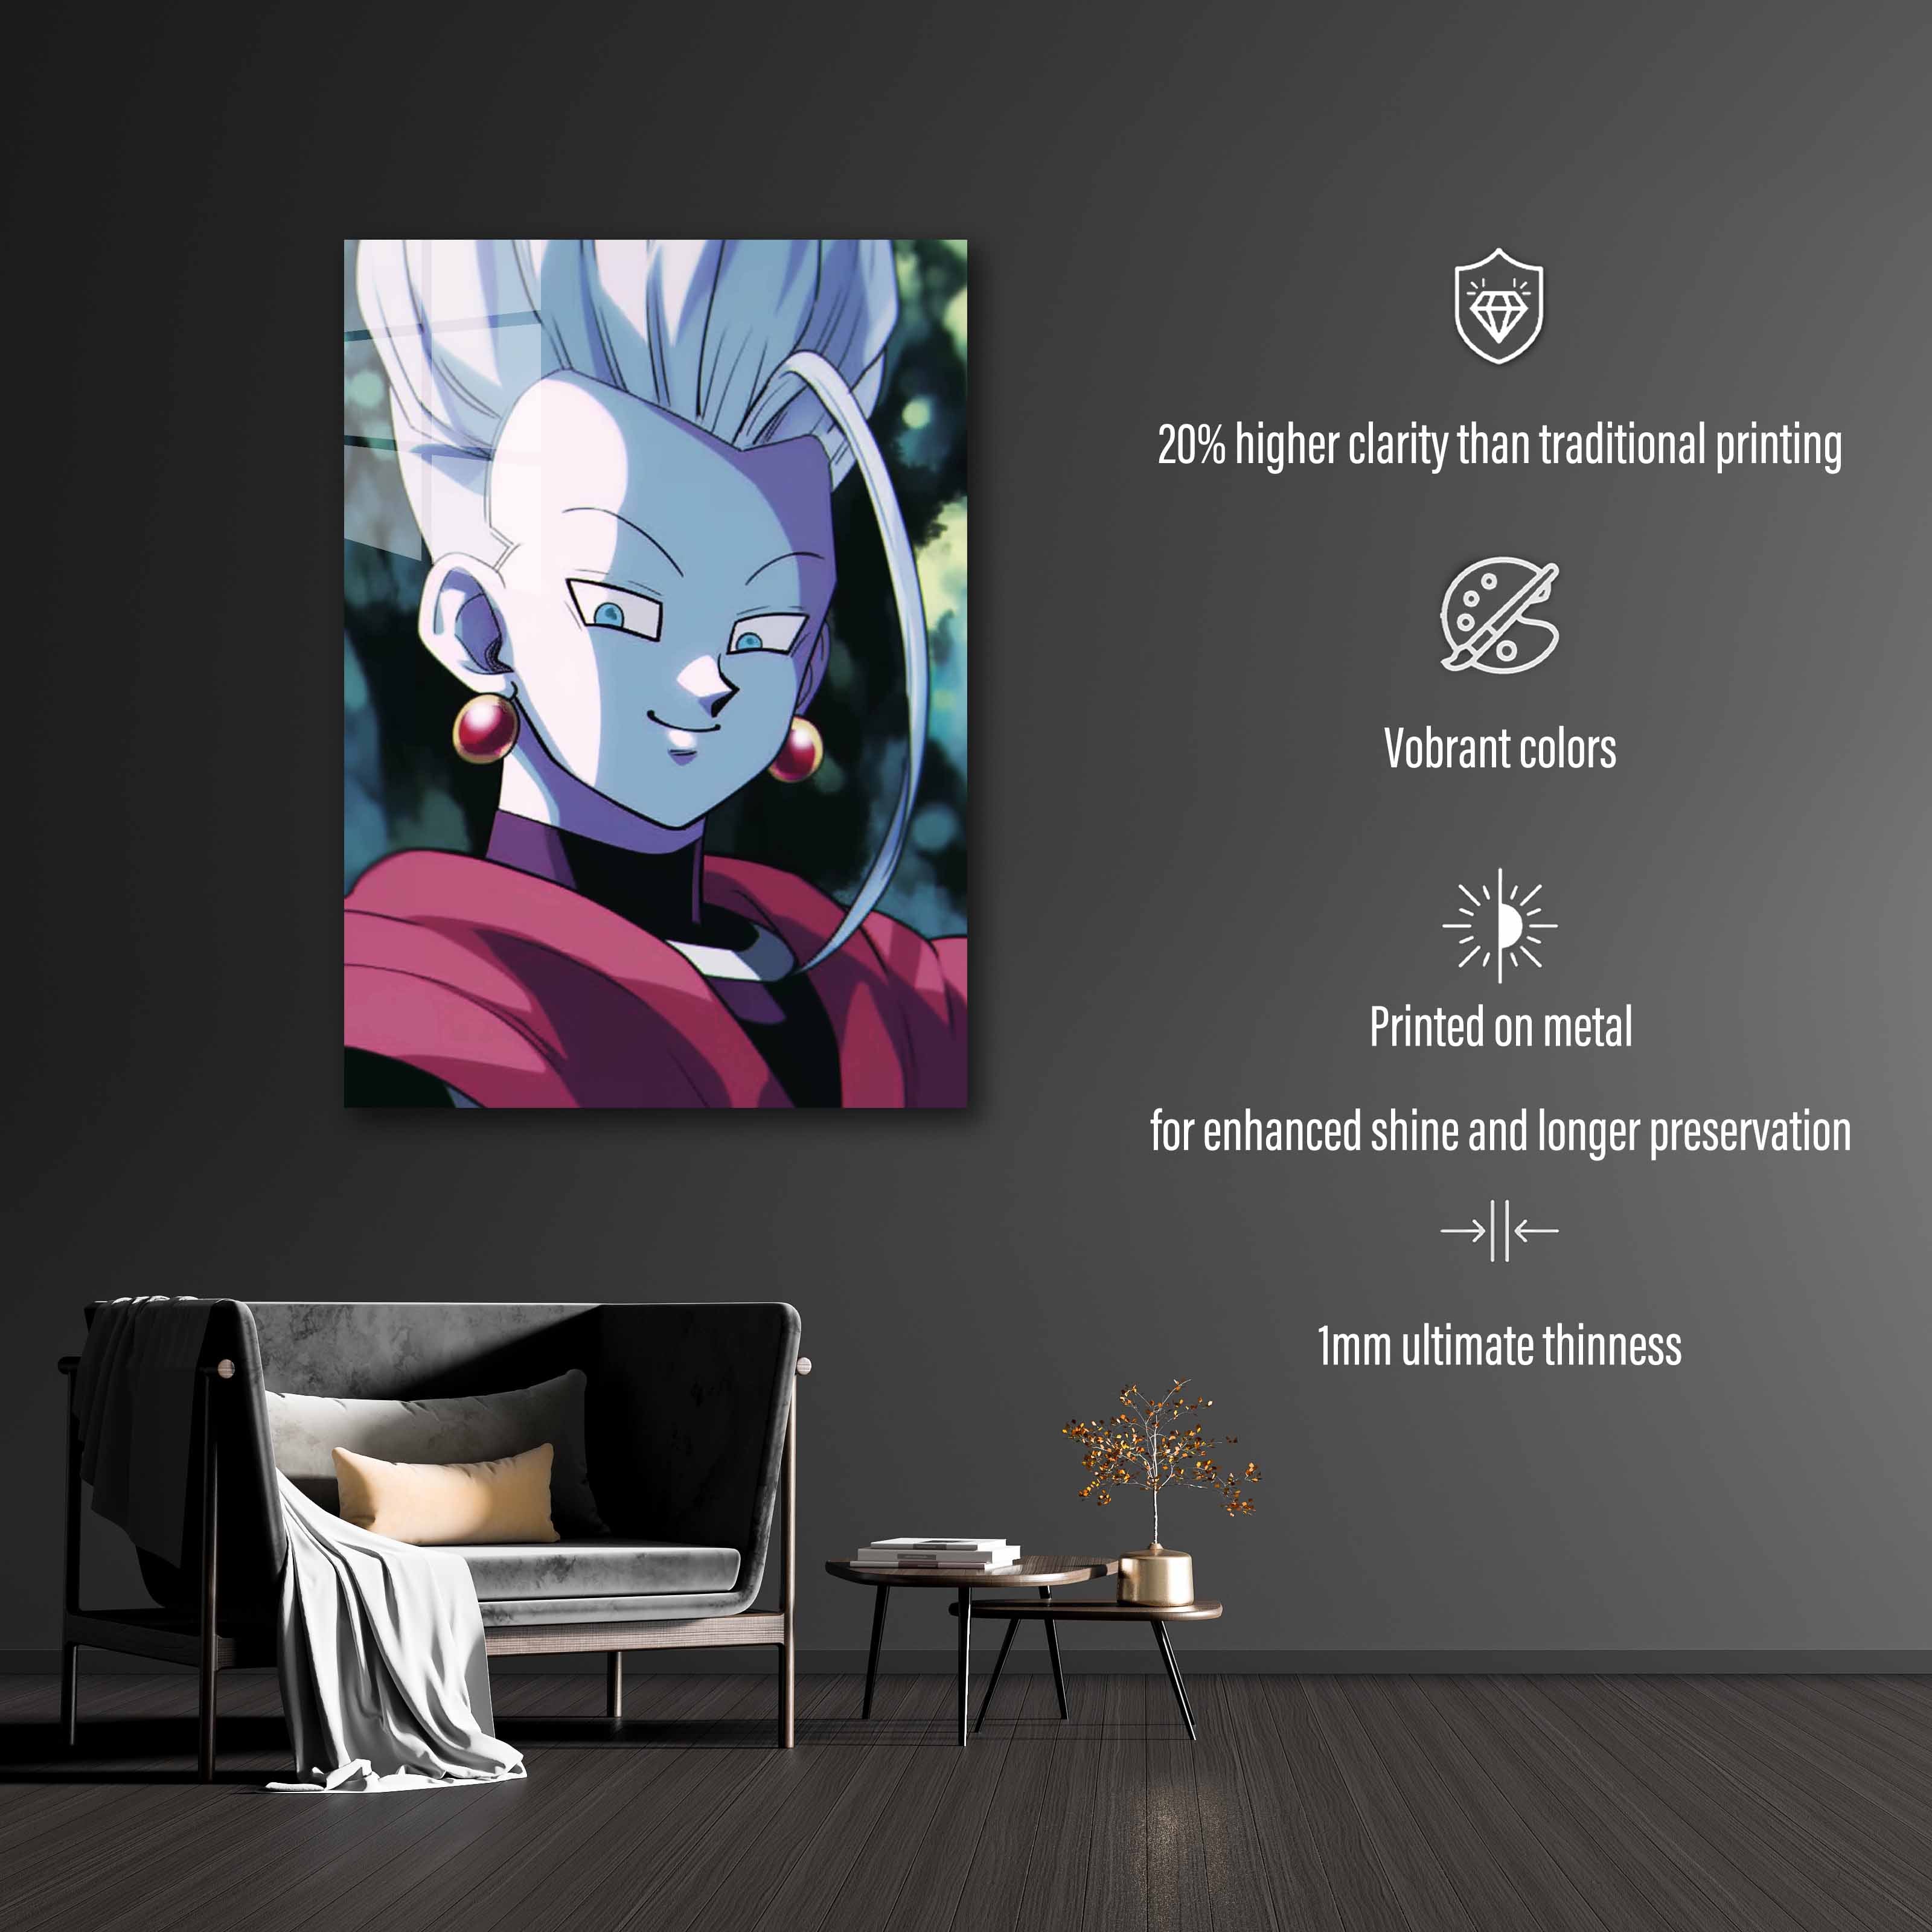 Ethereal Attendant_ Whis's Timeless Insights